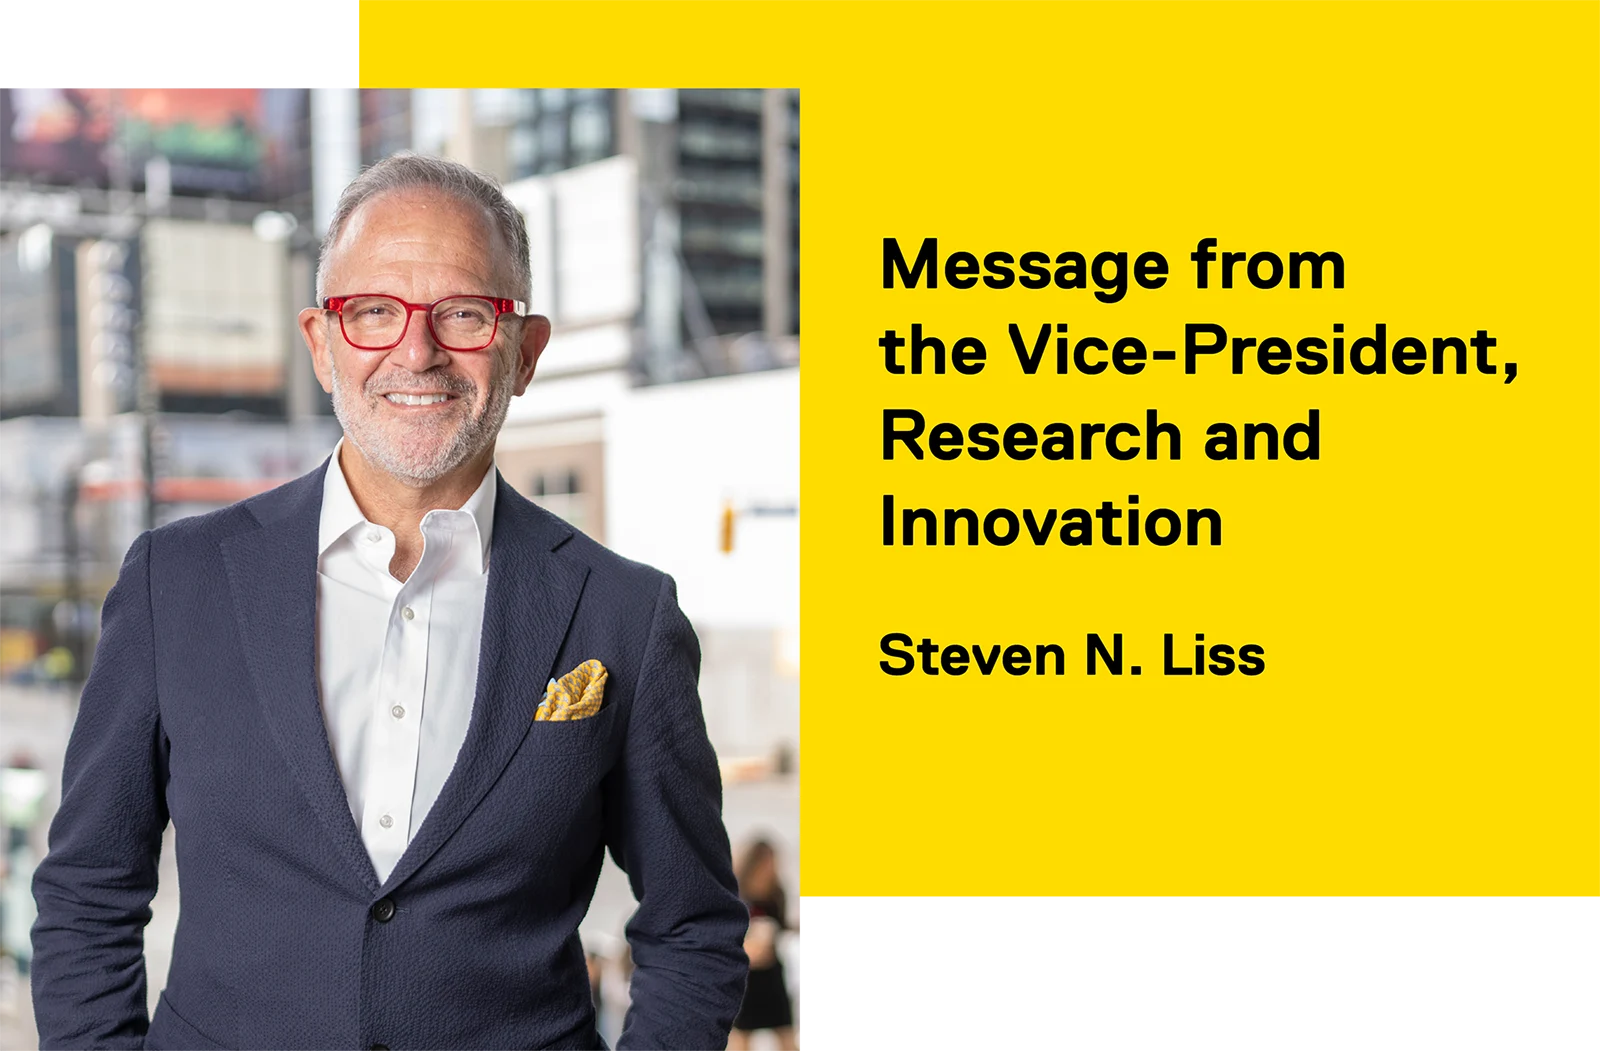 Message from the Vice-President, Research and Innovation